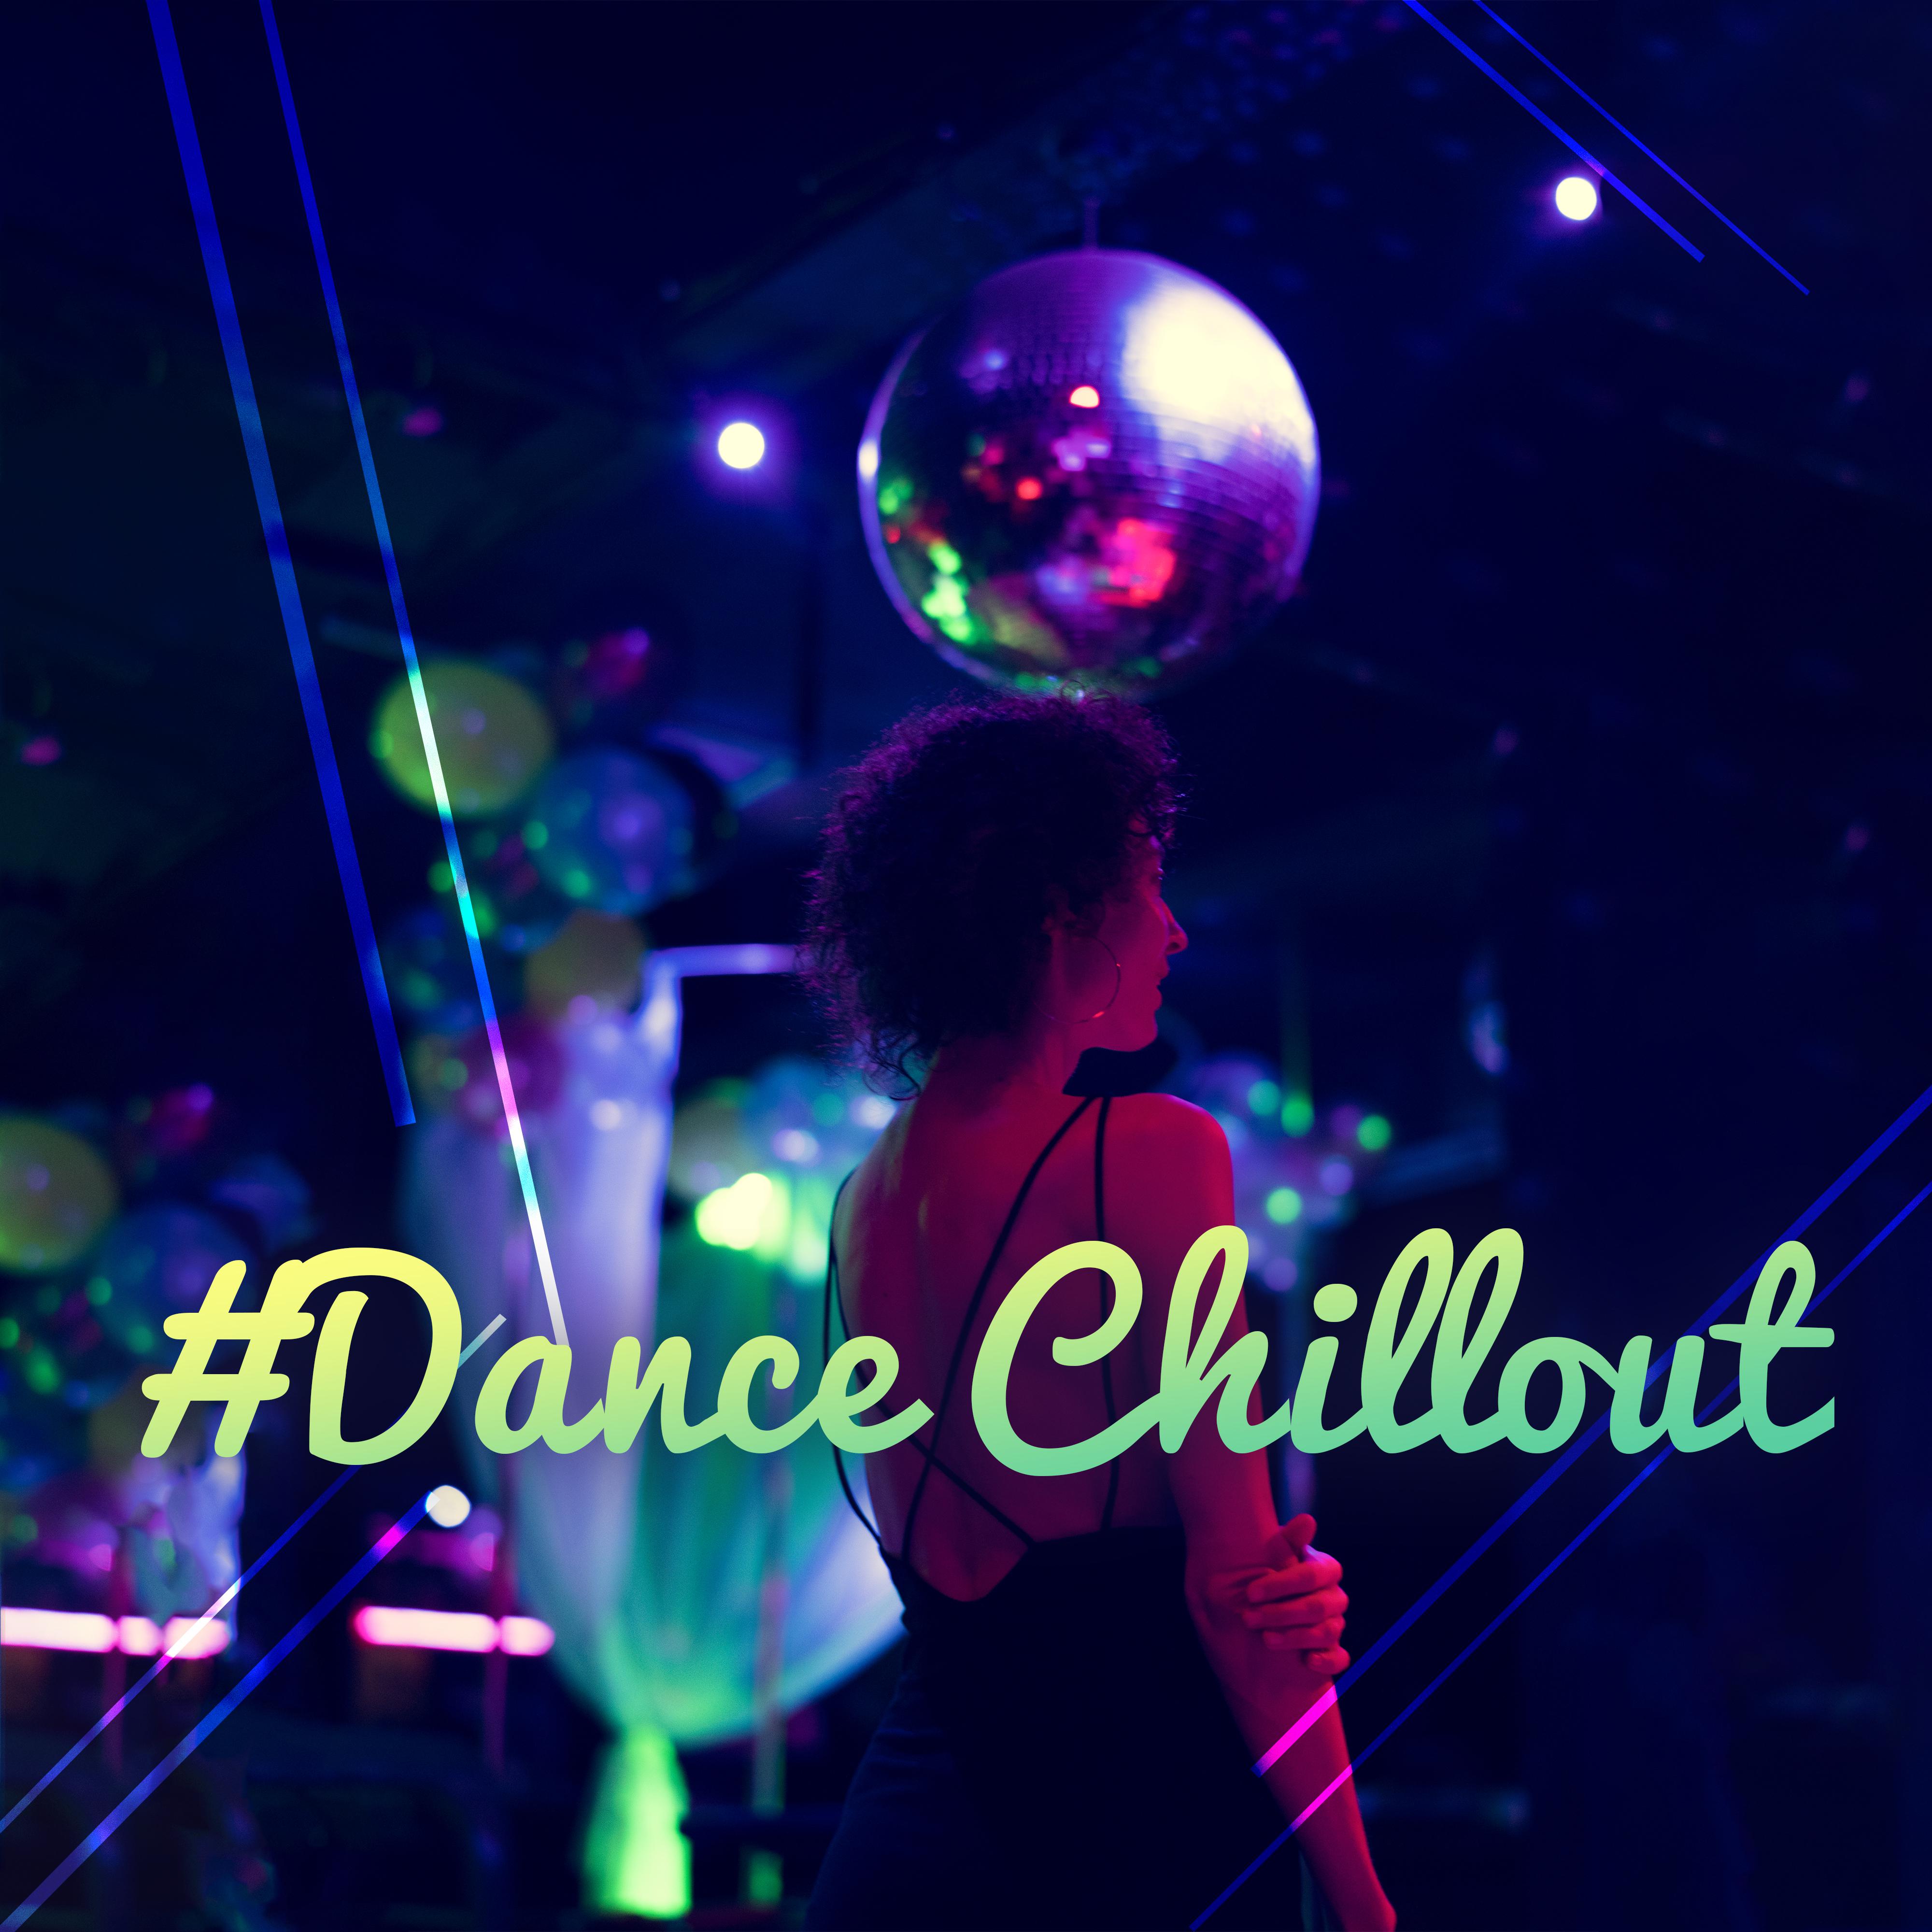 #Dance Chillout